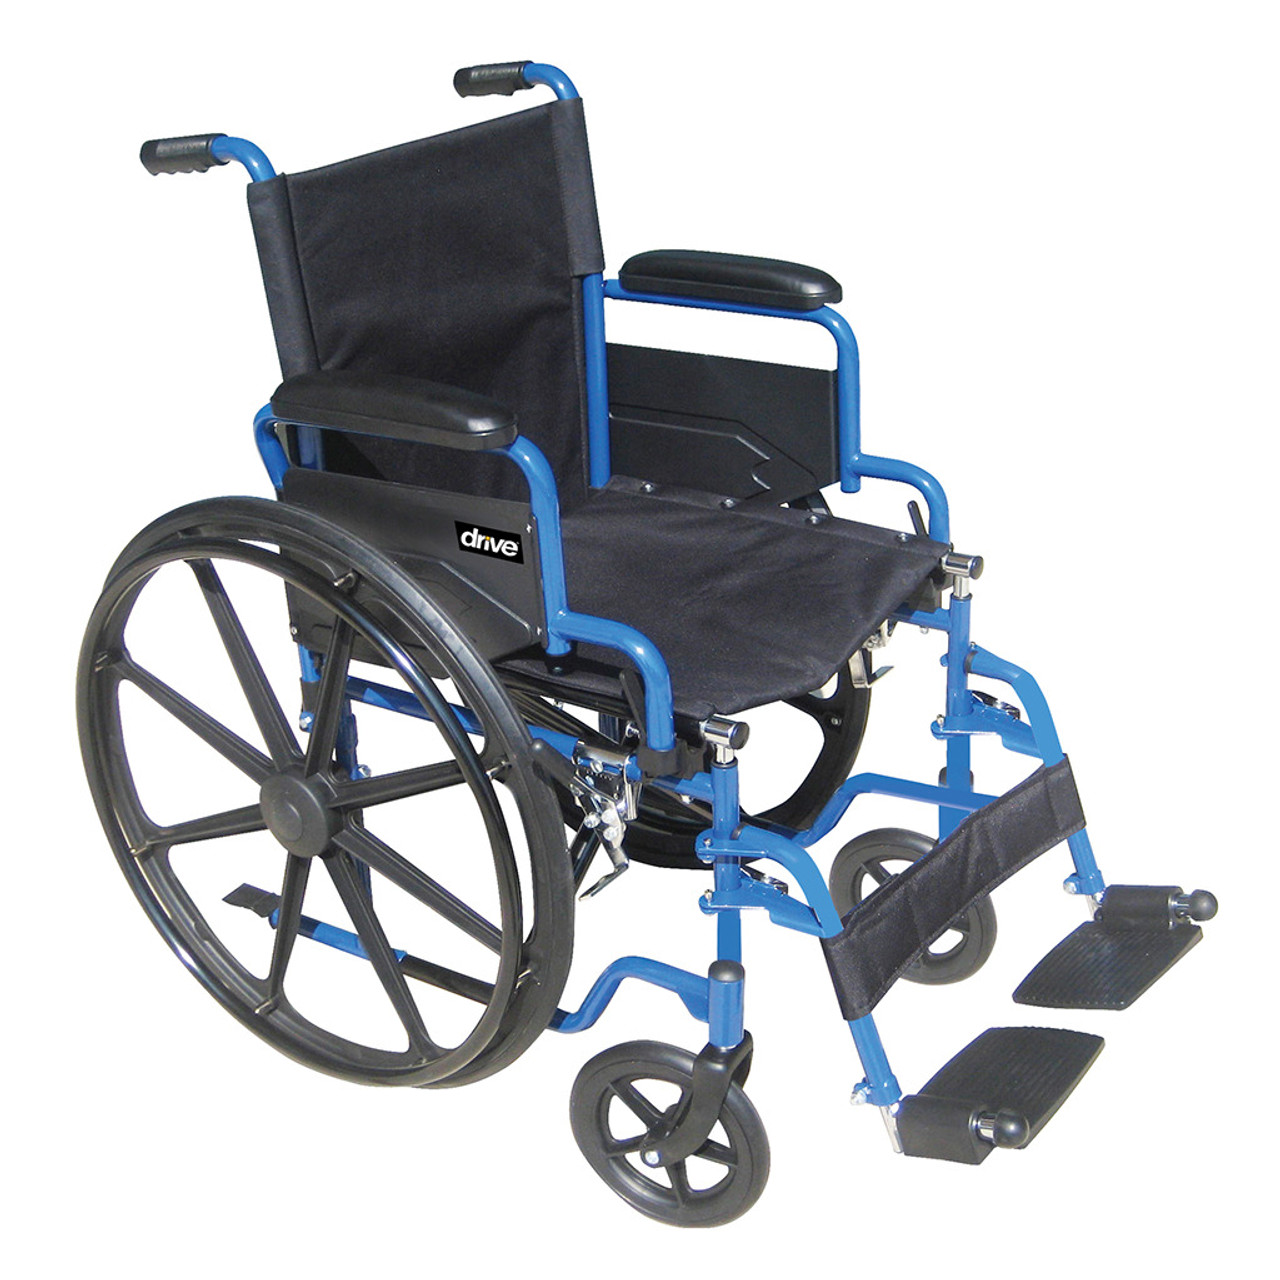 Most Popular Wheelchair Accessories for Tech Lovers